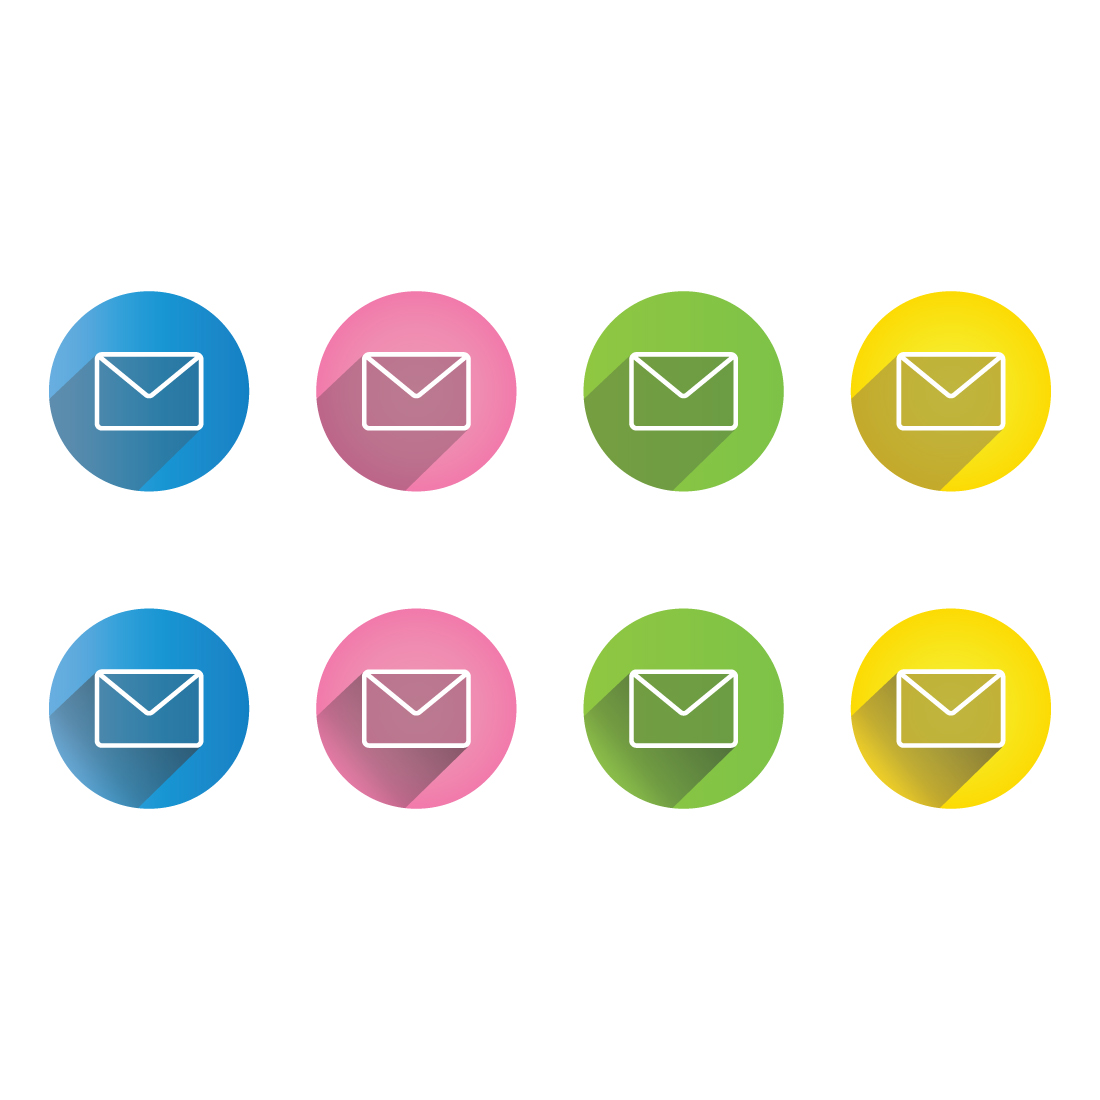 Colorful Round SVG Contact Icons preview image.